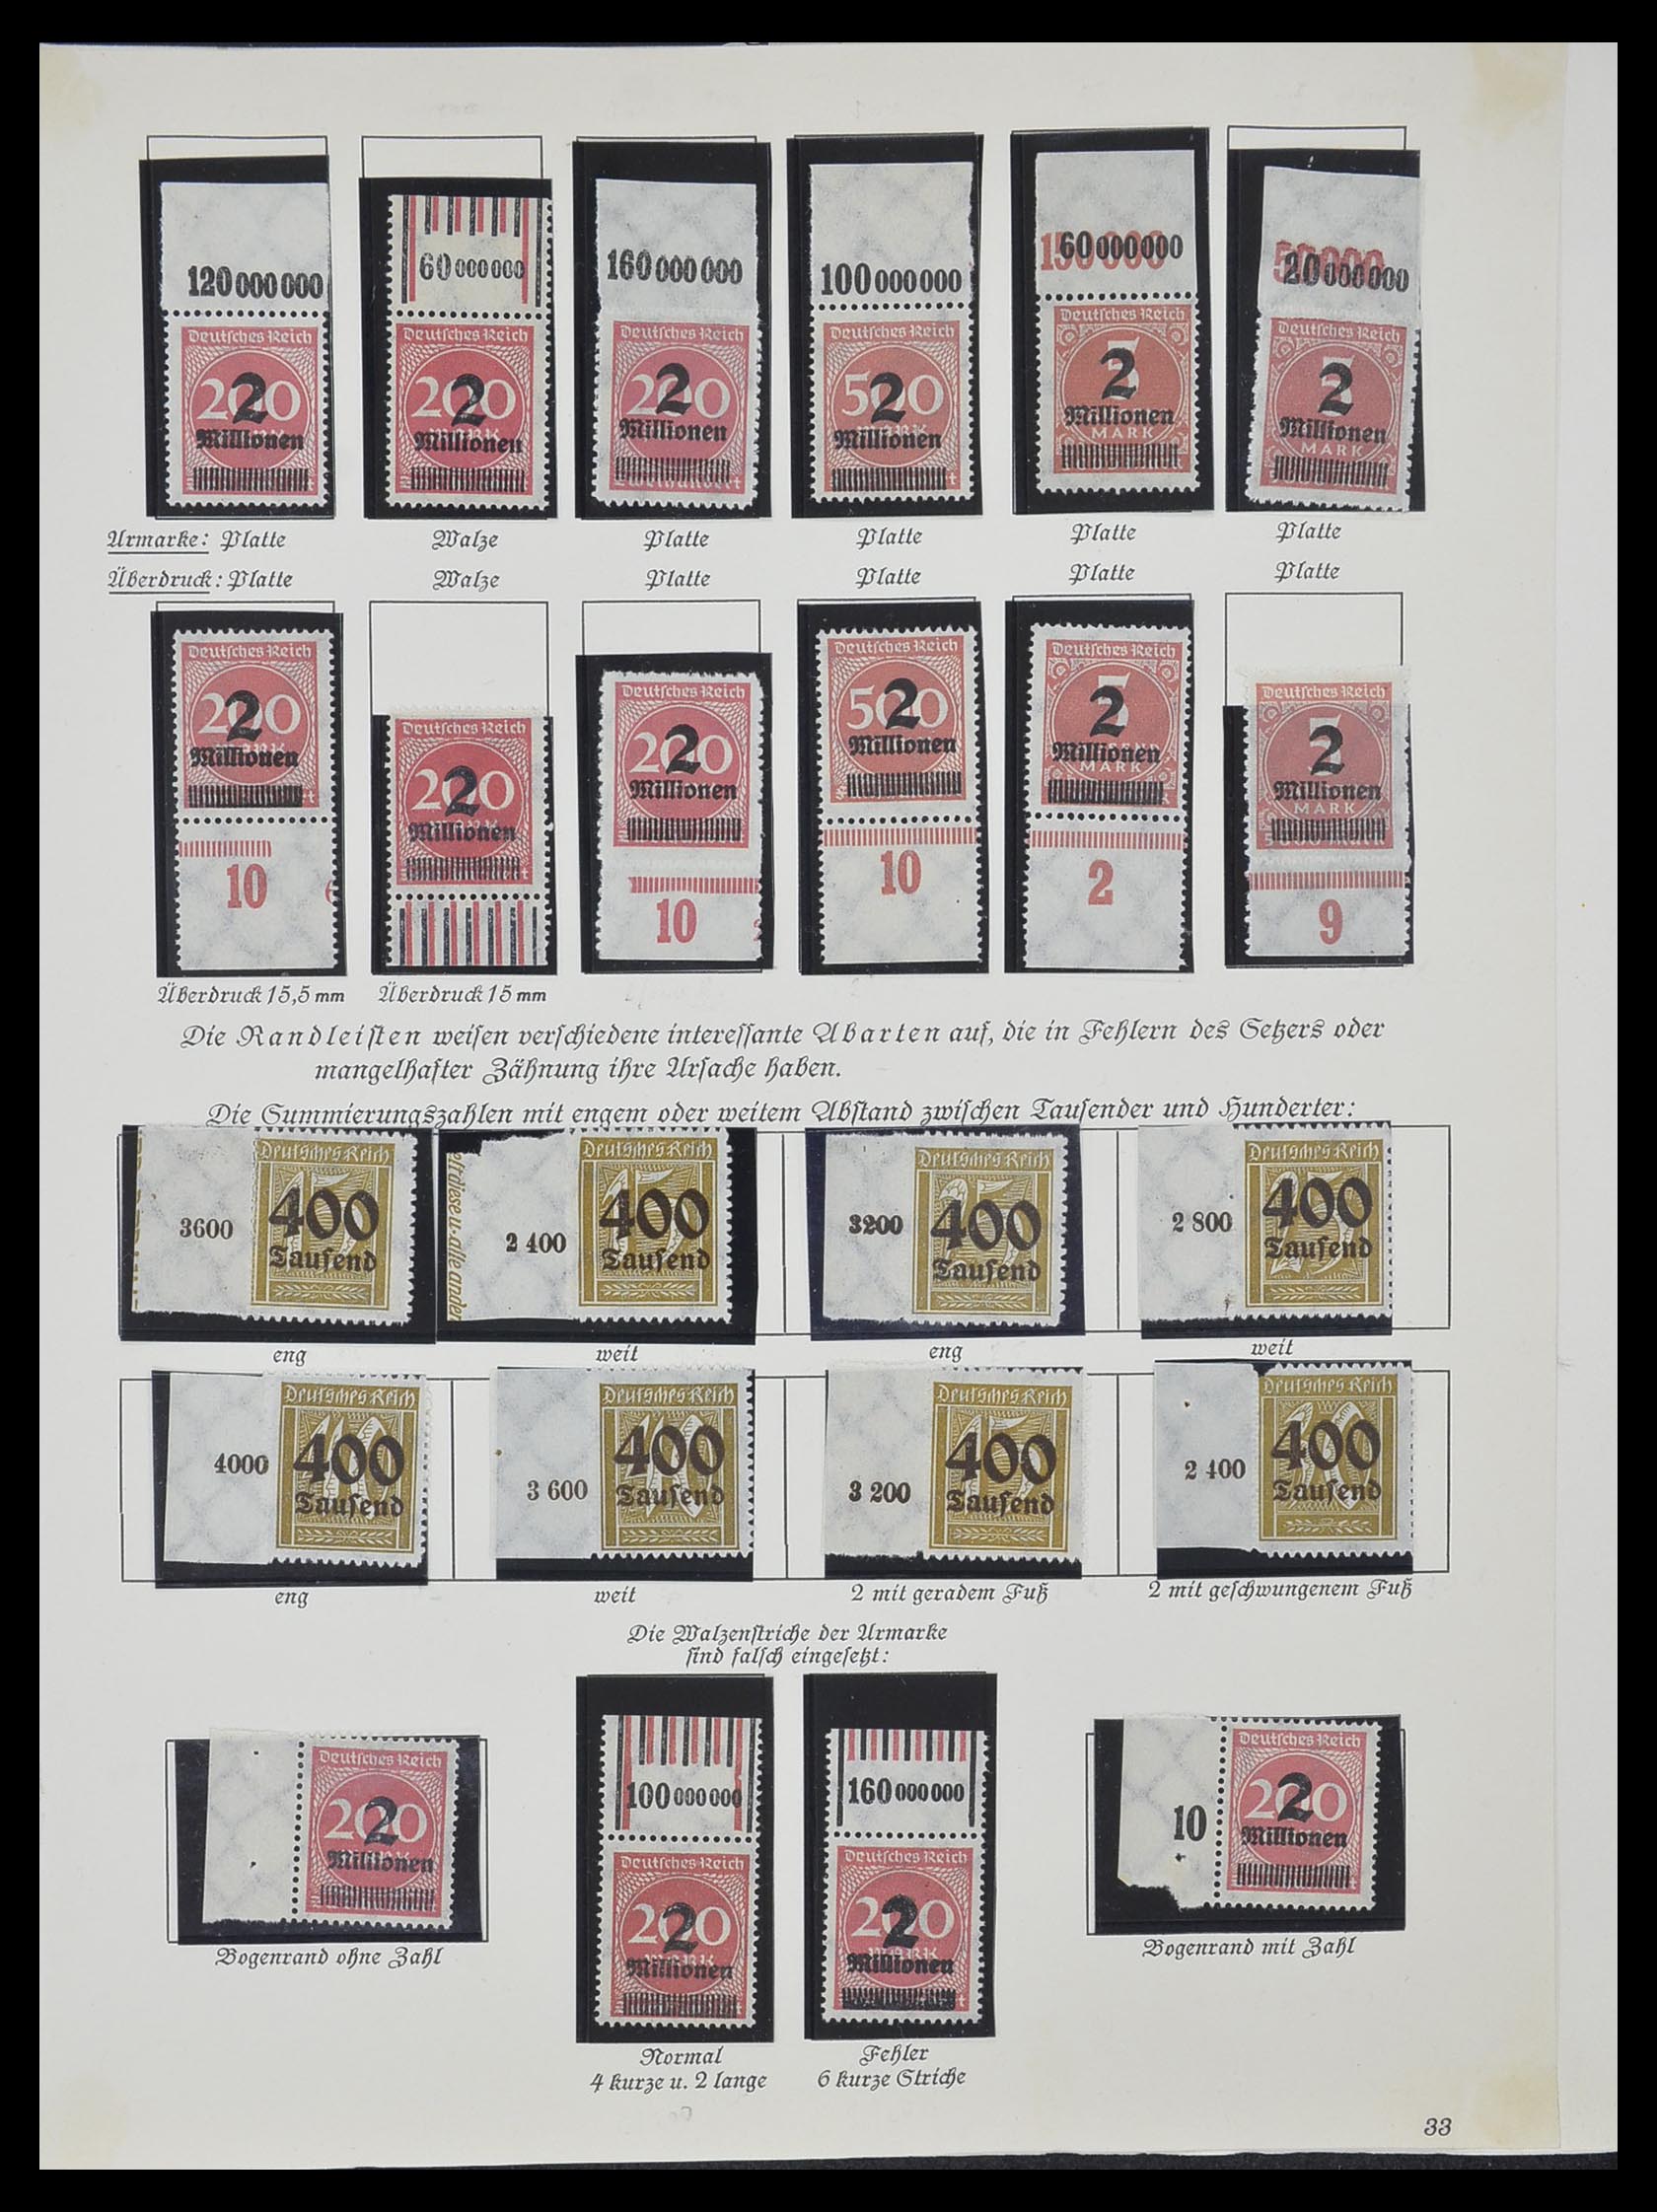 33957 014 - Stamp collection 33957 German Reich infla 1923.